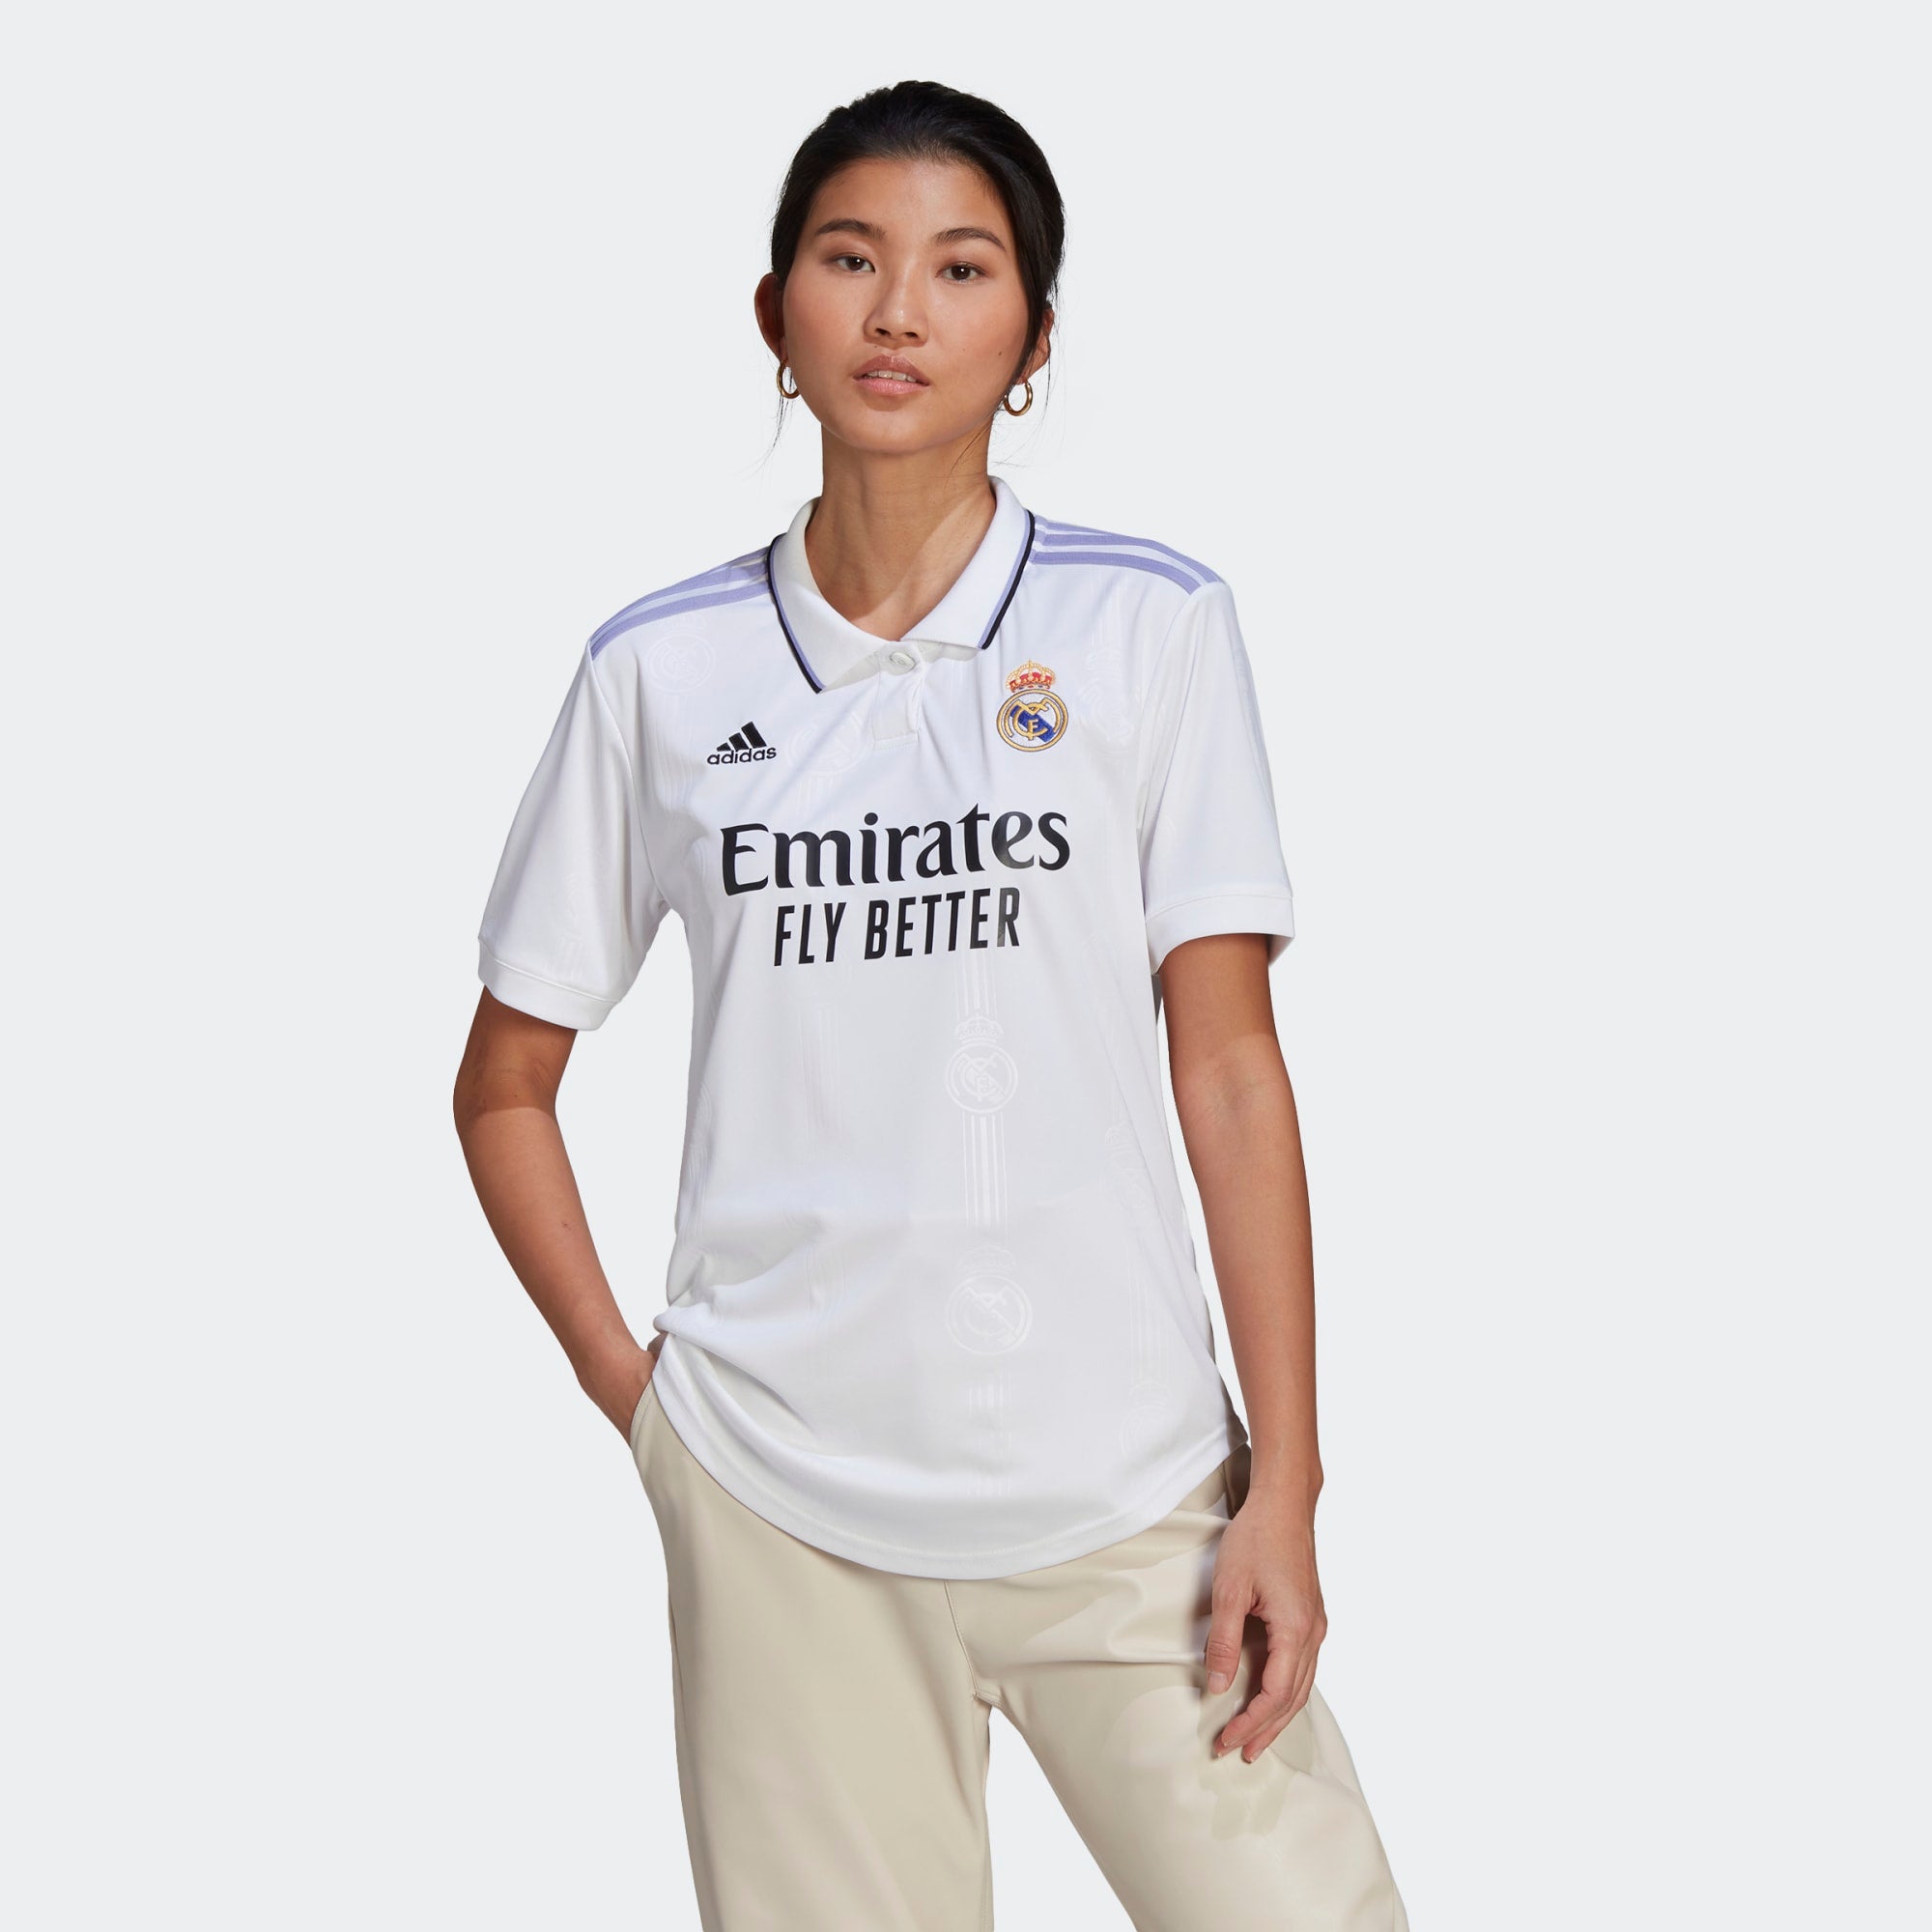 Adidas Fly Emirates Real Madrid 1/4 Button Up Soccer Jersey Size XS